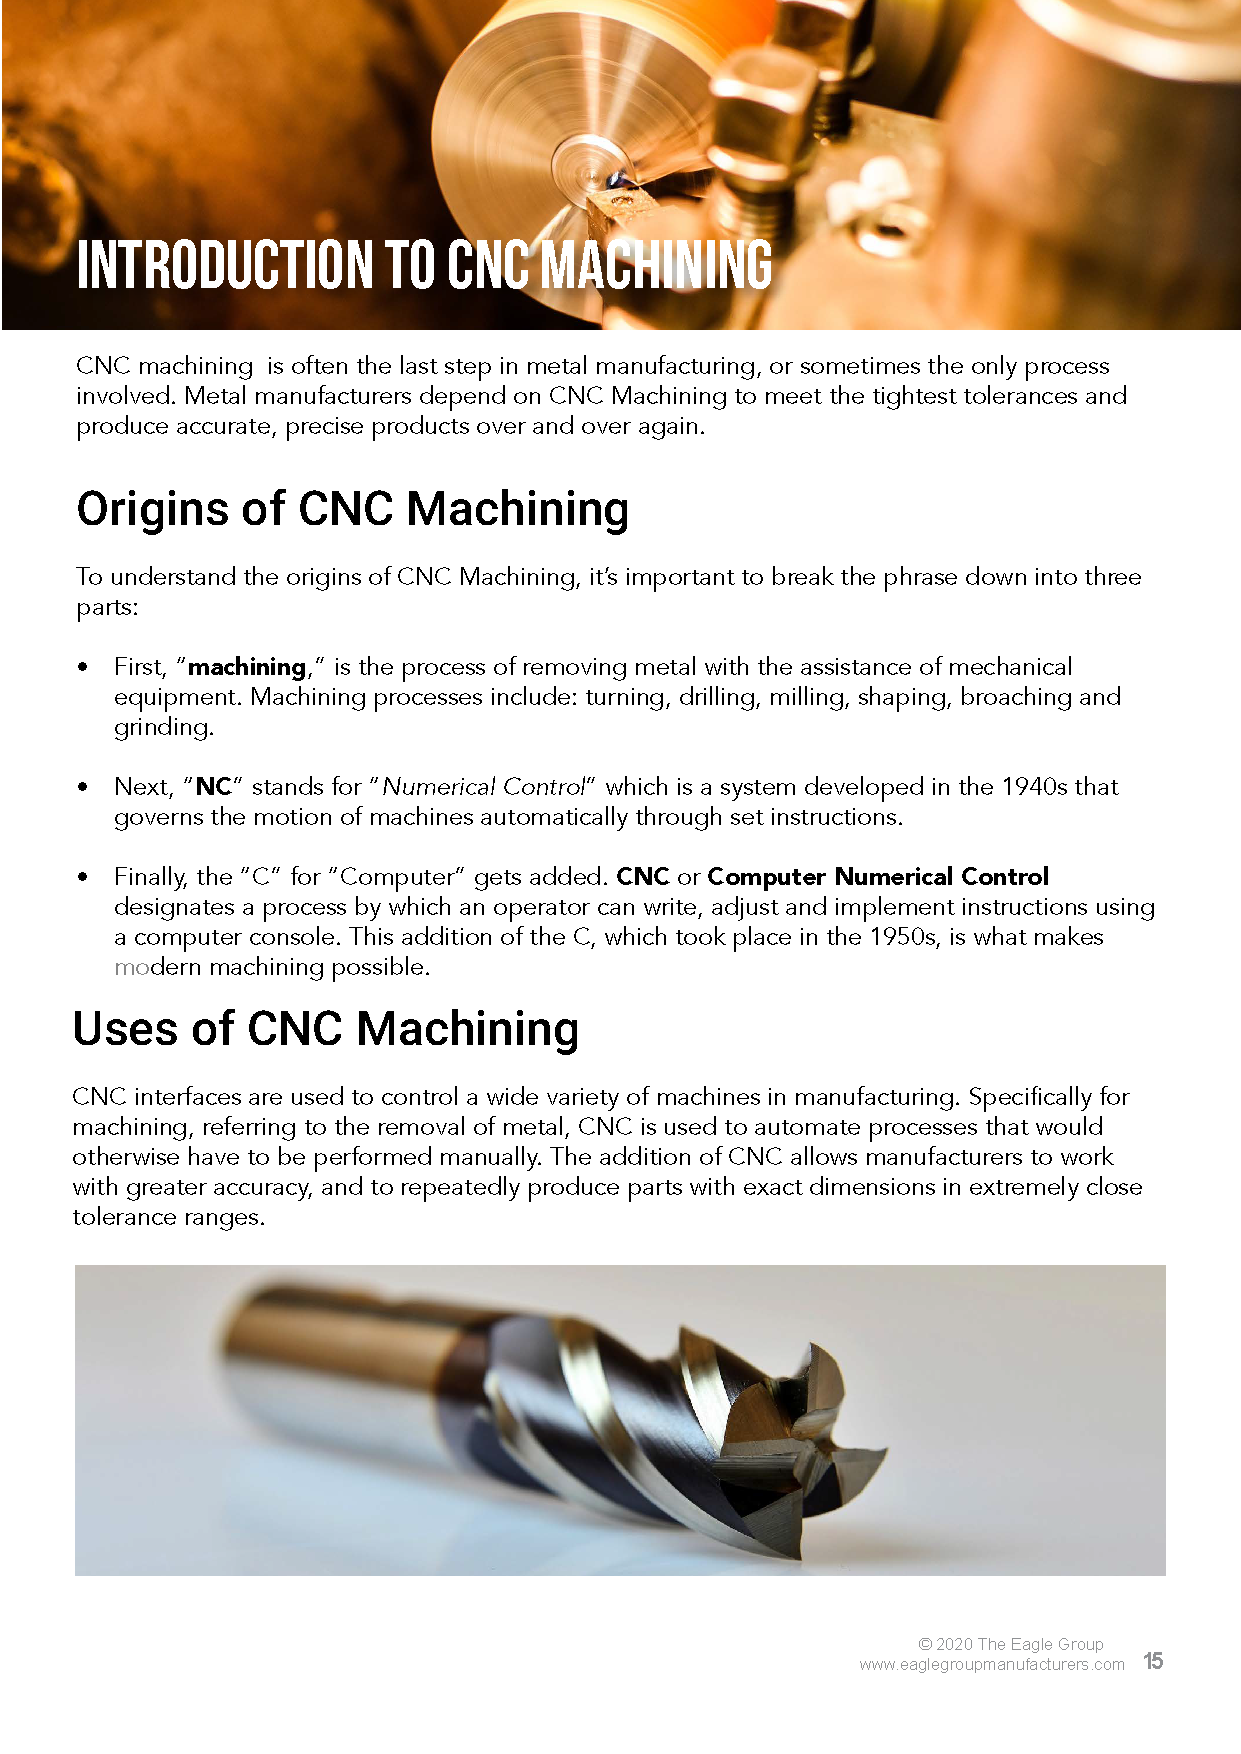 History, Uses, and Best Practices of Key Metalcasting and CNC Machining Processes(图15)